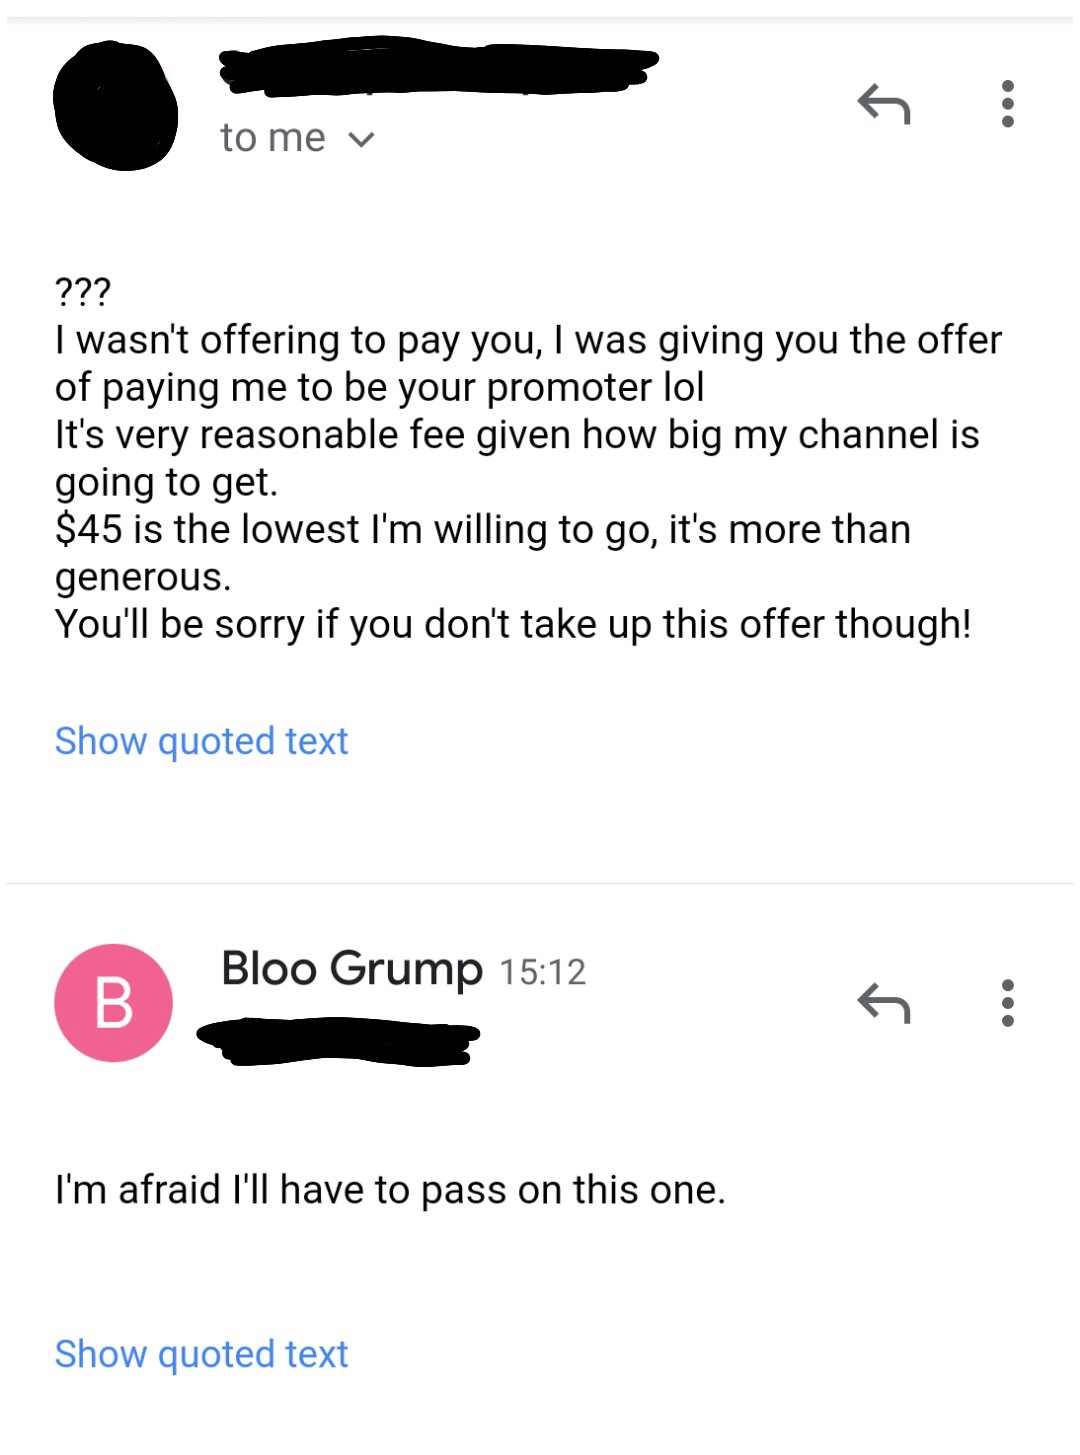 angle - to me v ??? I wasn't offering to pay you, I was giving you the offer of paying me to be your promoter lol It's very reasonable fee given how big my channel is going to get. $45 is the lowest I'm willing to go, it's more than generous. You'll be so